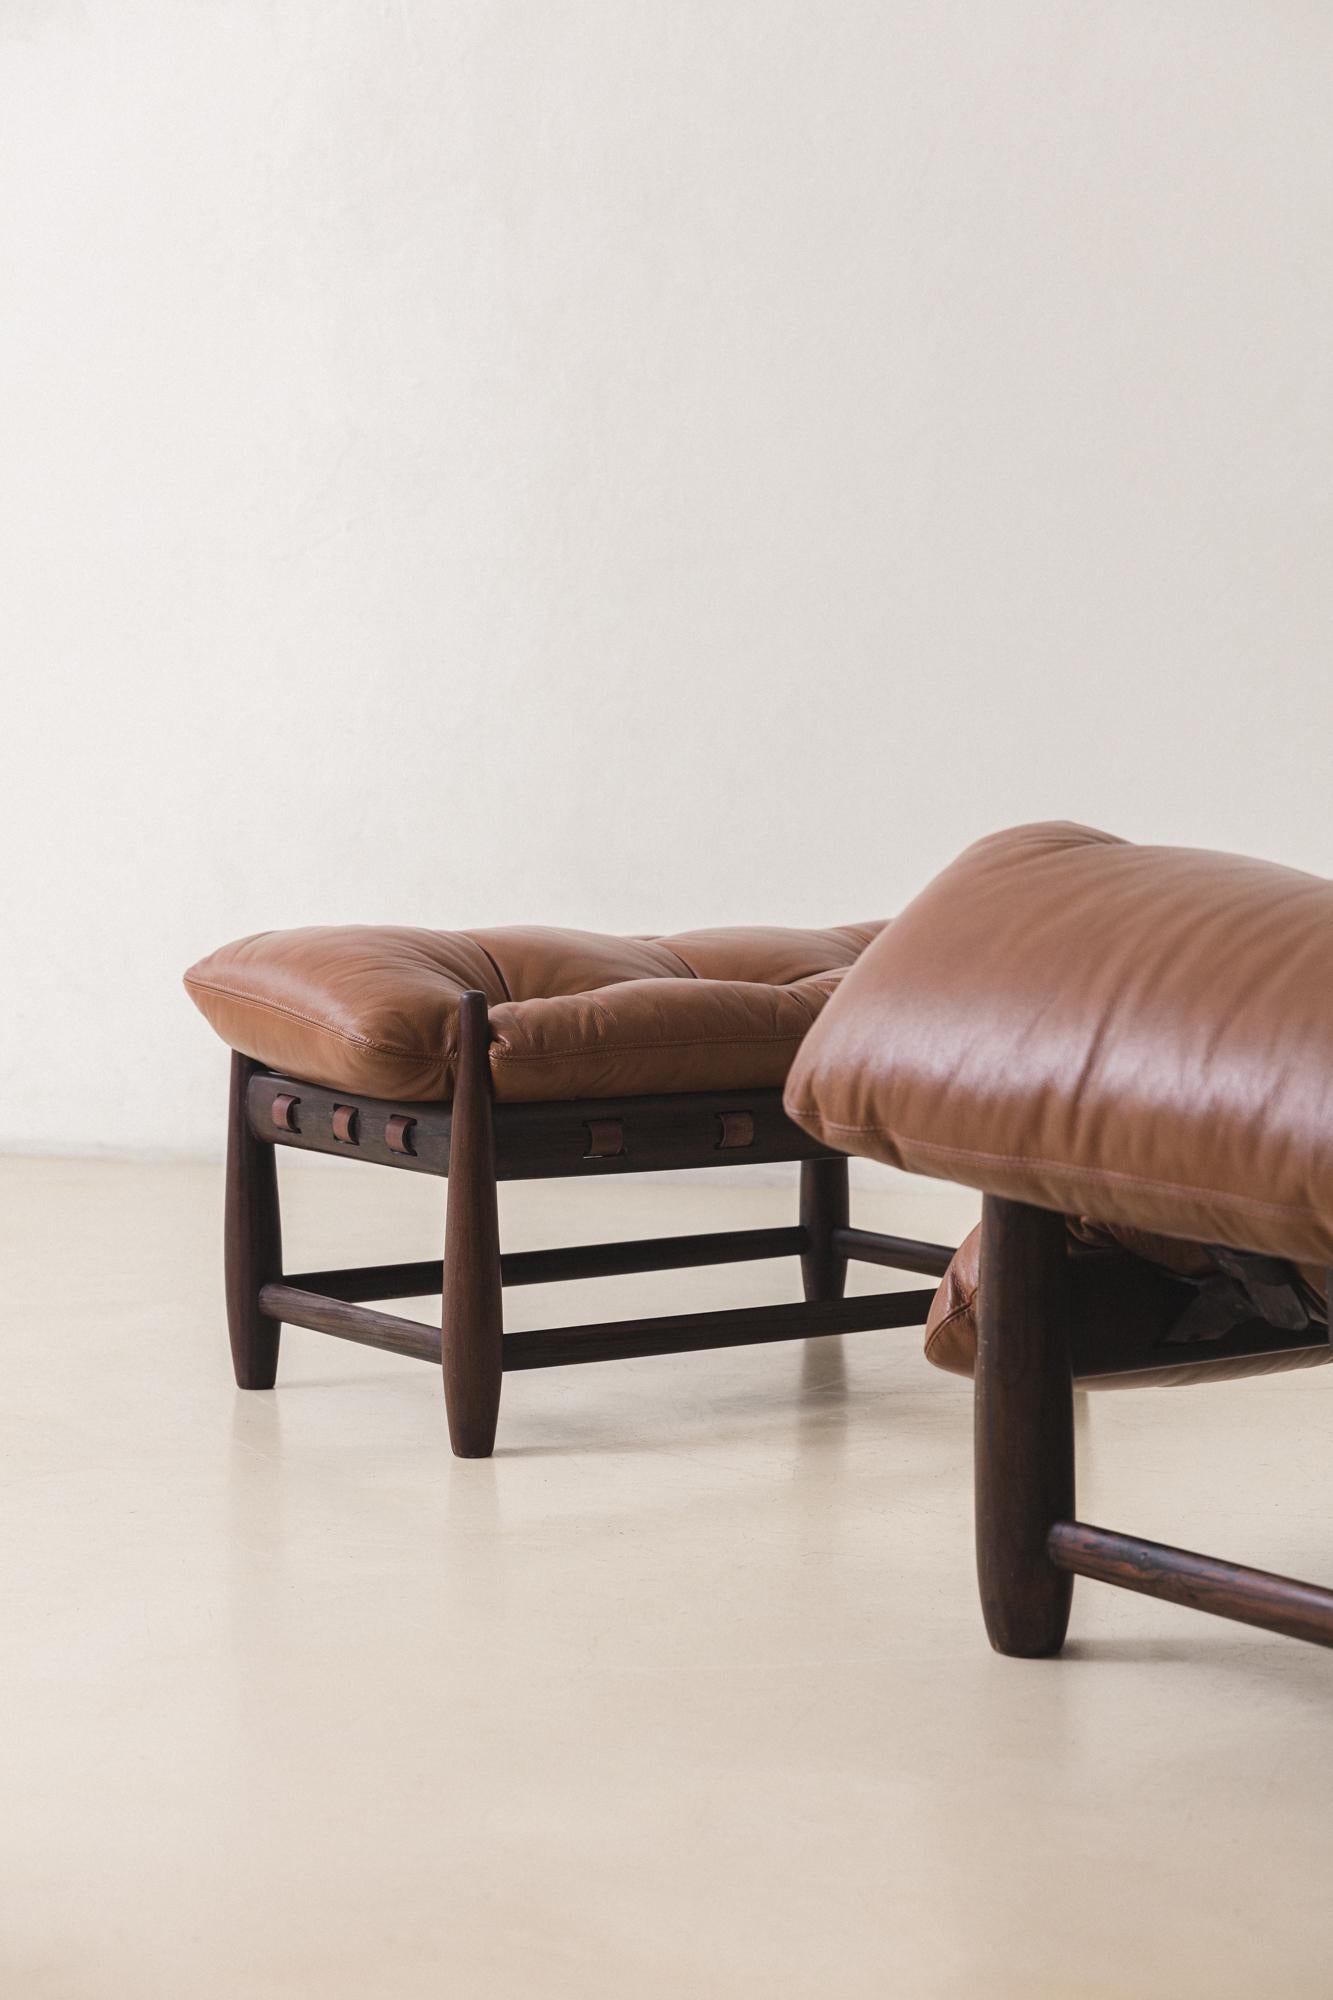 Leather Vintage 'Mole' Rosewood Armchair with Ottoman by Sergio Rodrigues, 1957, Brazil